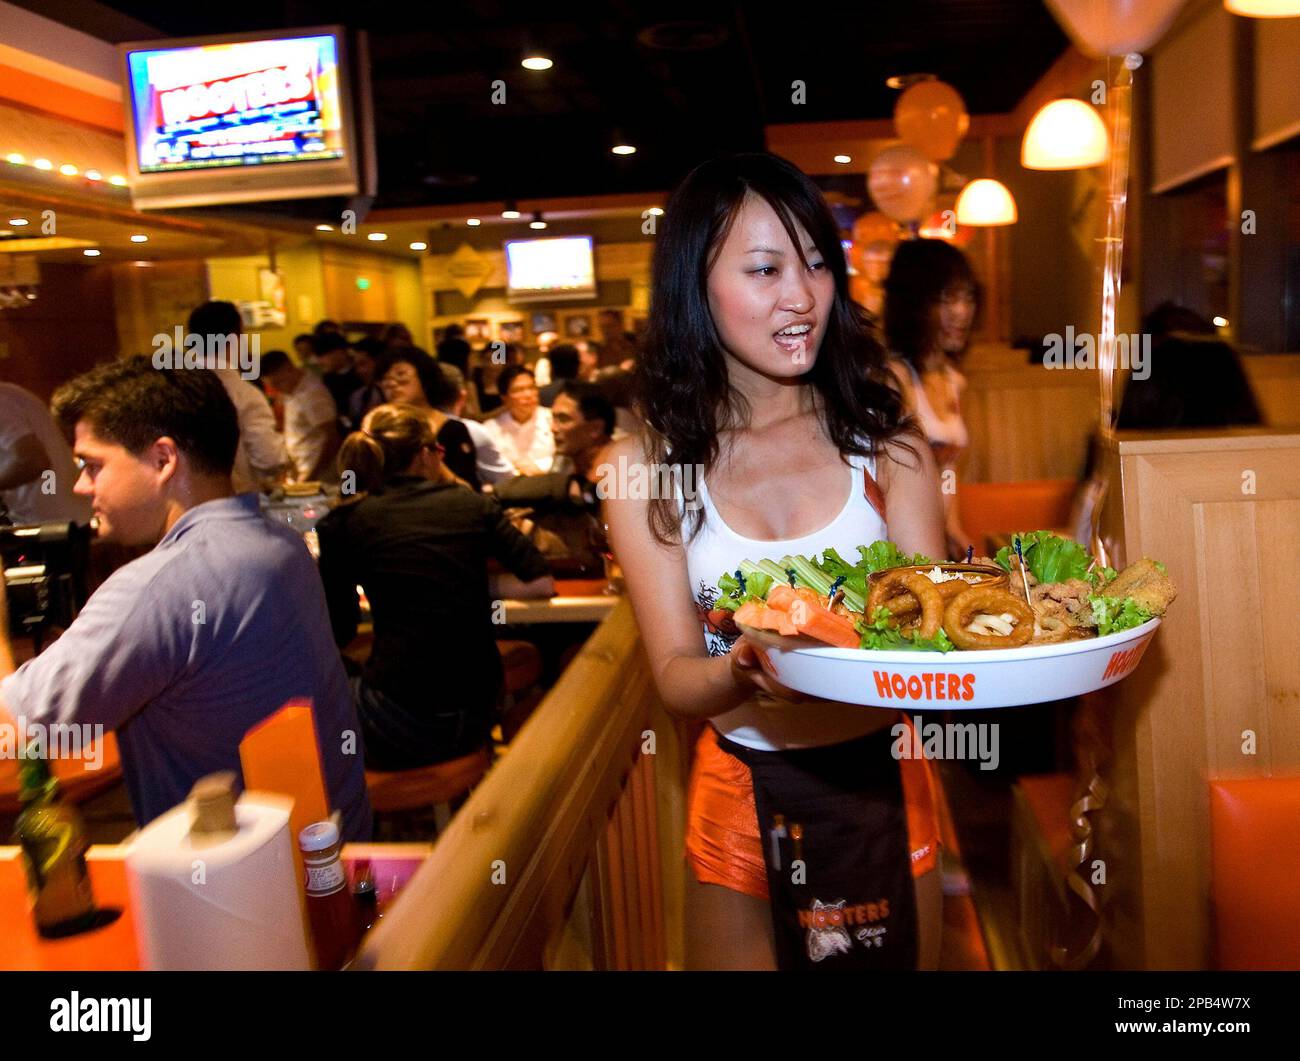 Hooters - The orange shorts can open you to a world of new